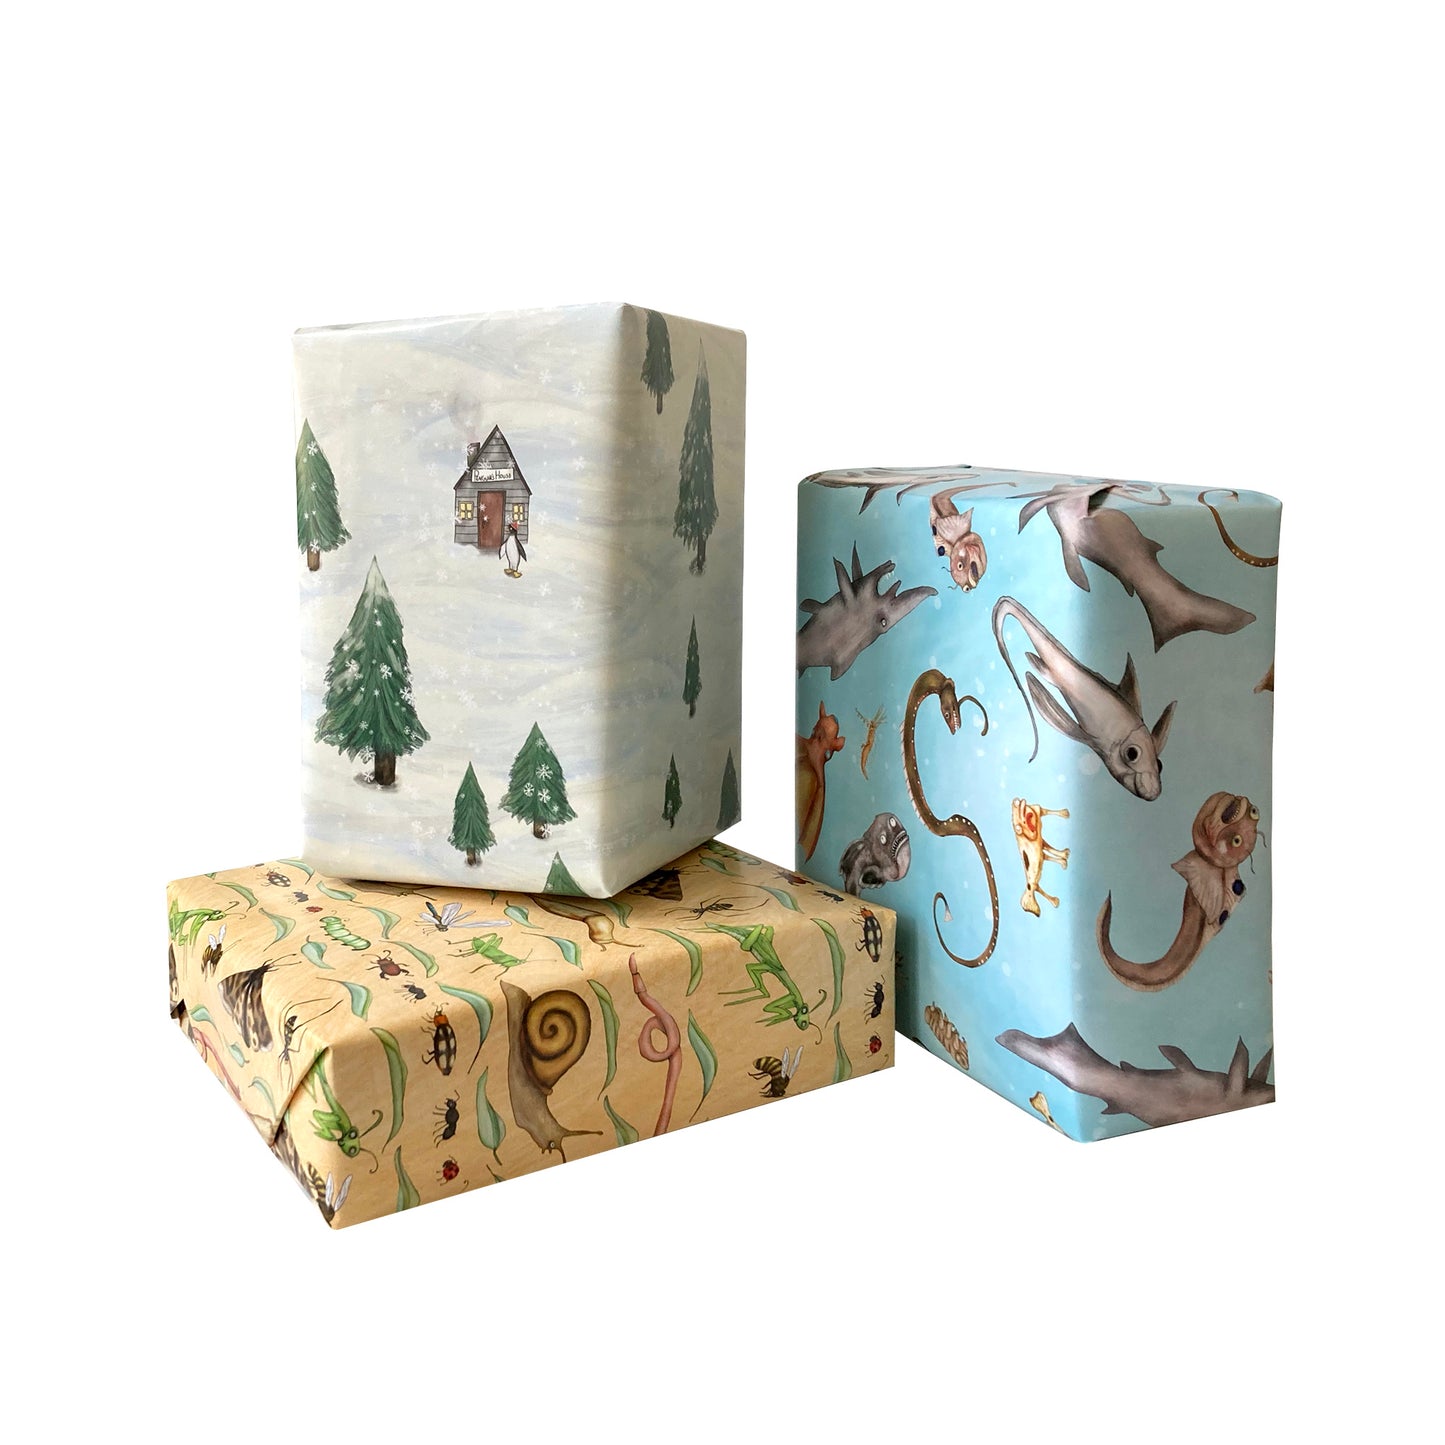 Penguin's House Wrapping Paper - Set of Three Sheets